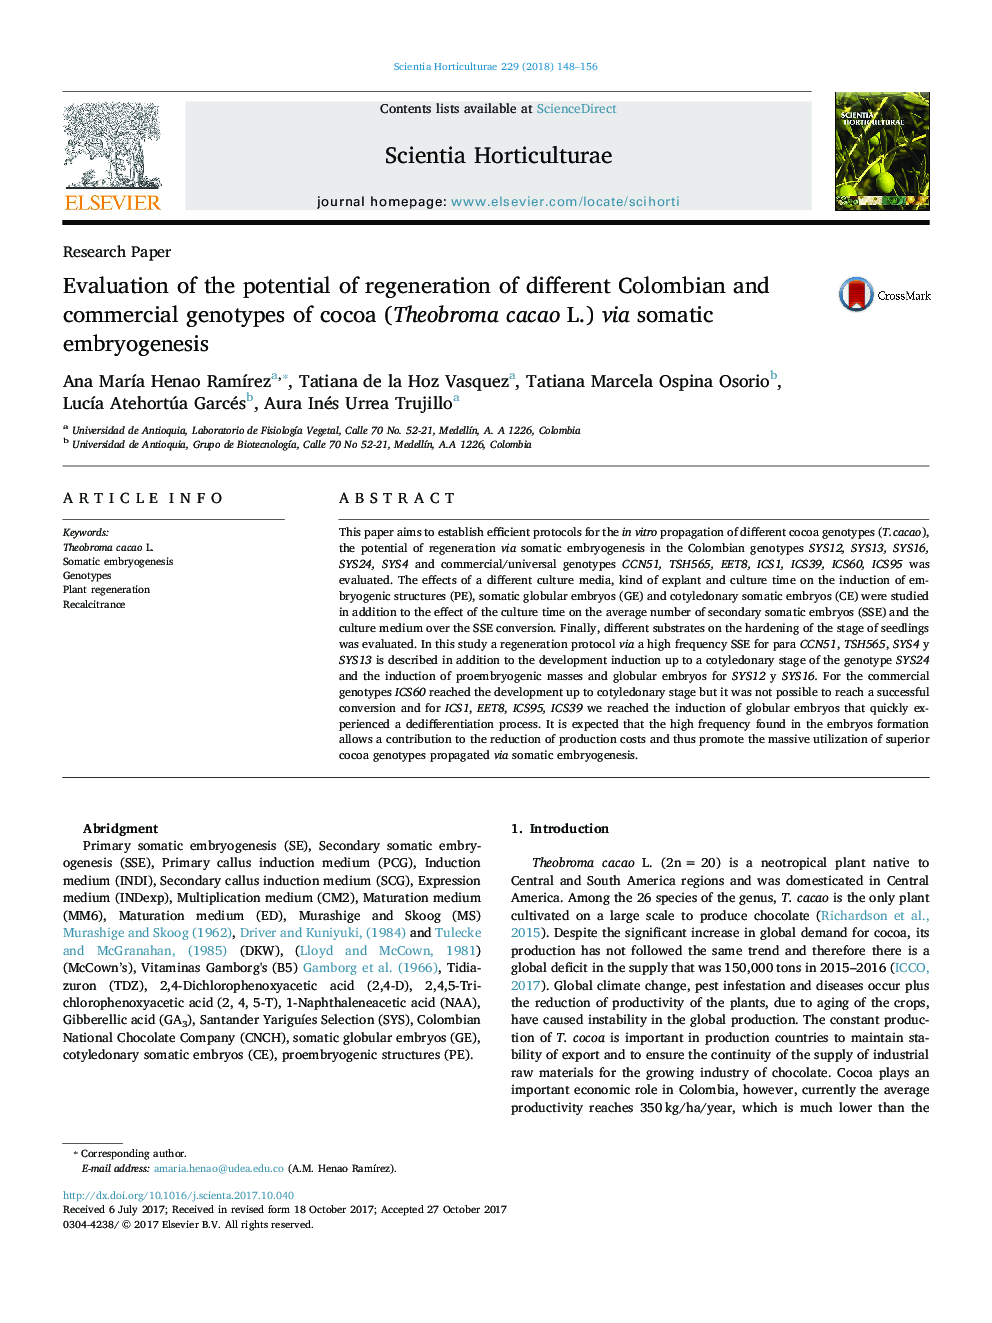 Evaluation of the potential of regeneration of different Colombian and commercial genotypes of cocoa (Theobroma cacao L.) via somatic embryogenesis